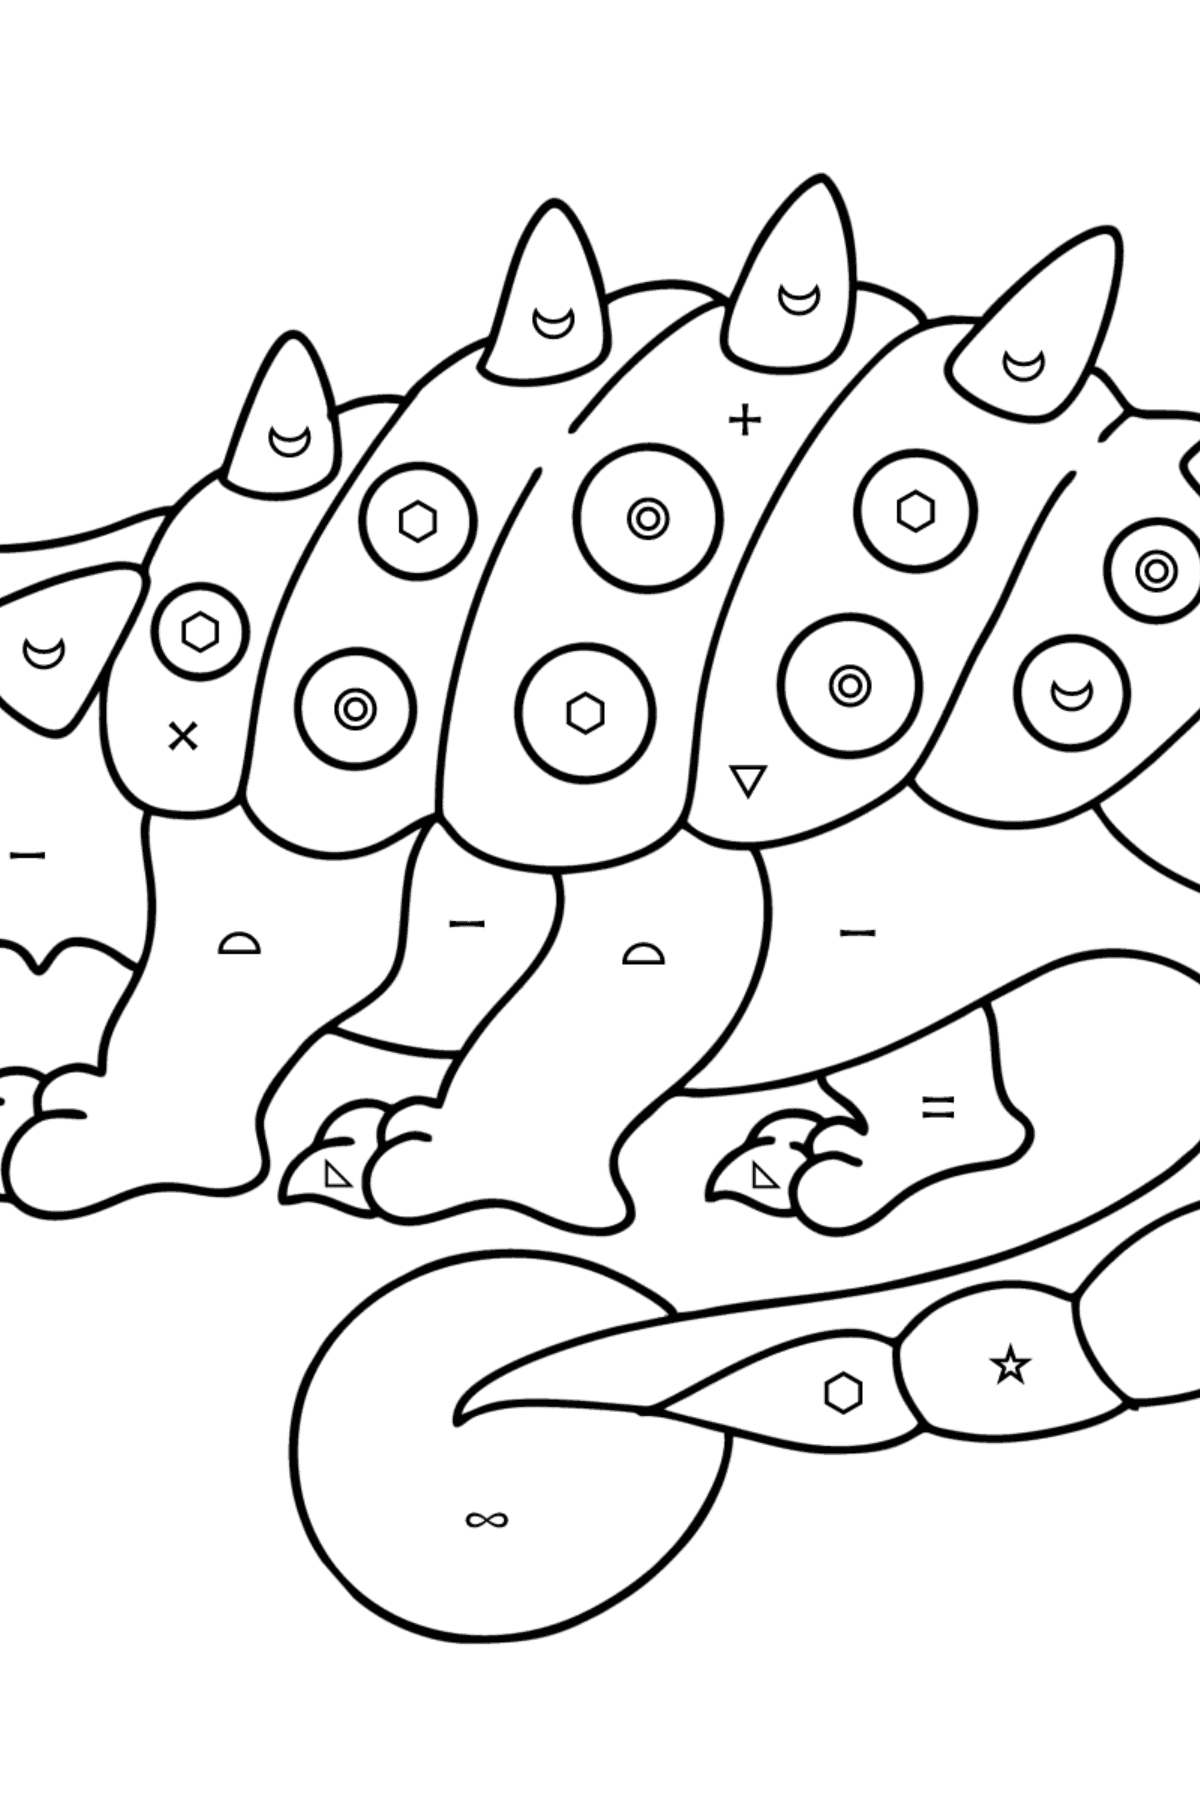 Ankylosaurus coloring page - Coloring by Symbols and Geometric Shapes for Kids